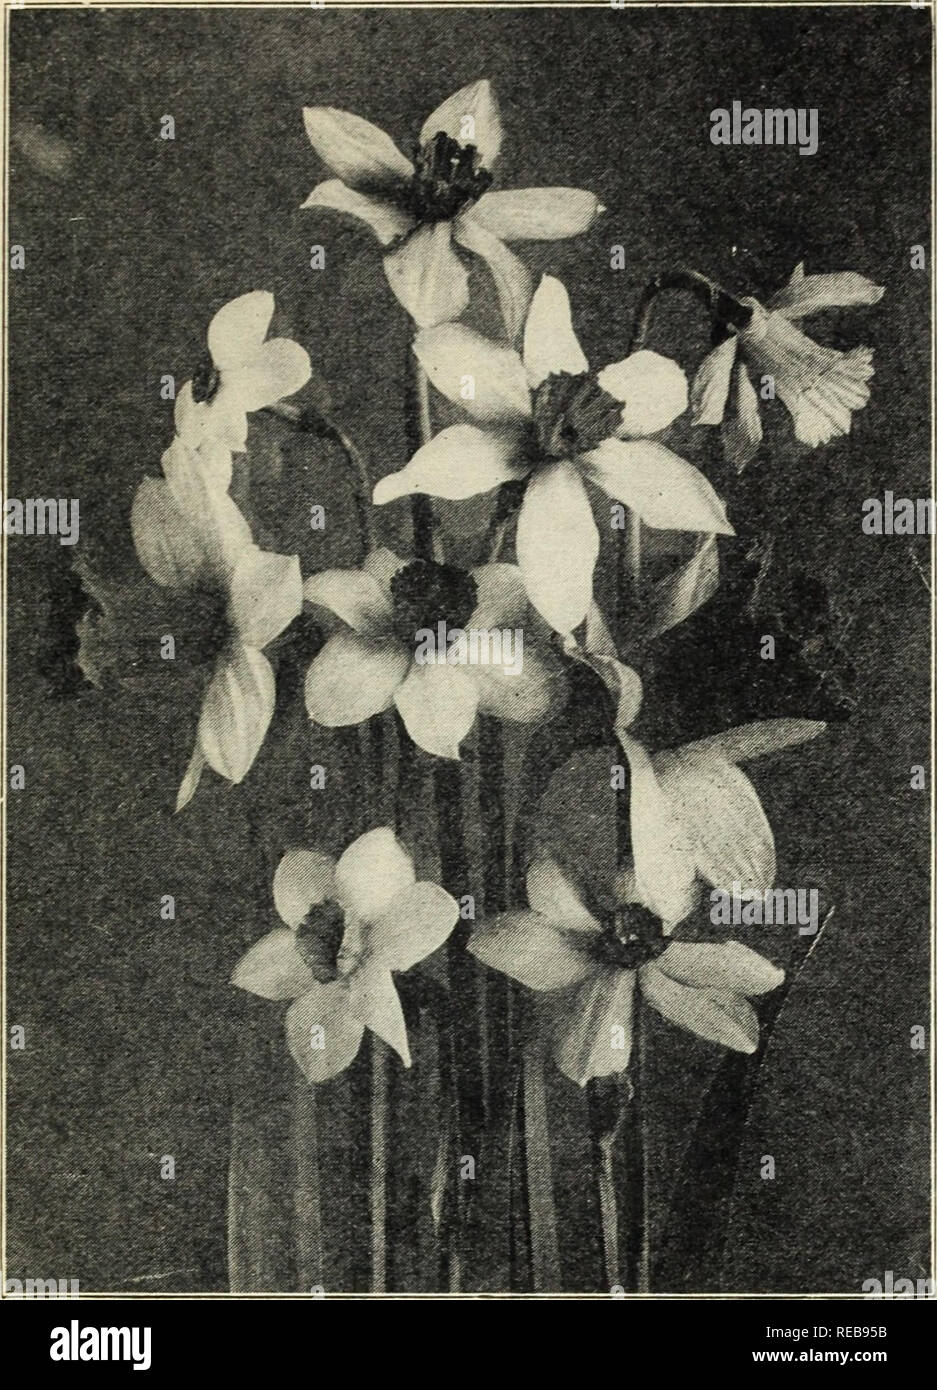 . Dutch bulbs for spring blooming. Seeds Catalogs; Flowers Seeds Catalogs; Bulbs (Plants) Seeds Catalogs; Nurseries (Horticulture) Catalogs. Florists' Price List — Fall 1928 — The W. W. Barnard Co., 3942 S. Federal St., Chicago ! 3. Narcissi or Daffodils NOTE—The Government prohibits the importation of Narcissi bulbs for sale. Our stock has been grown in America under highly favorable conditions and should prove equal to imported stock. Conspicuous. Barrii. Doz., $1.25; 100, $8.50; 1,000, $80.00 Large, soft yellow perianth with short cup, edged orange scarlet. Empress. Ajax-Bicolor. Double nos Stock Photo